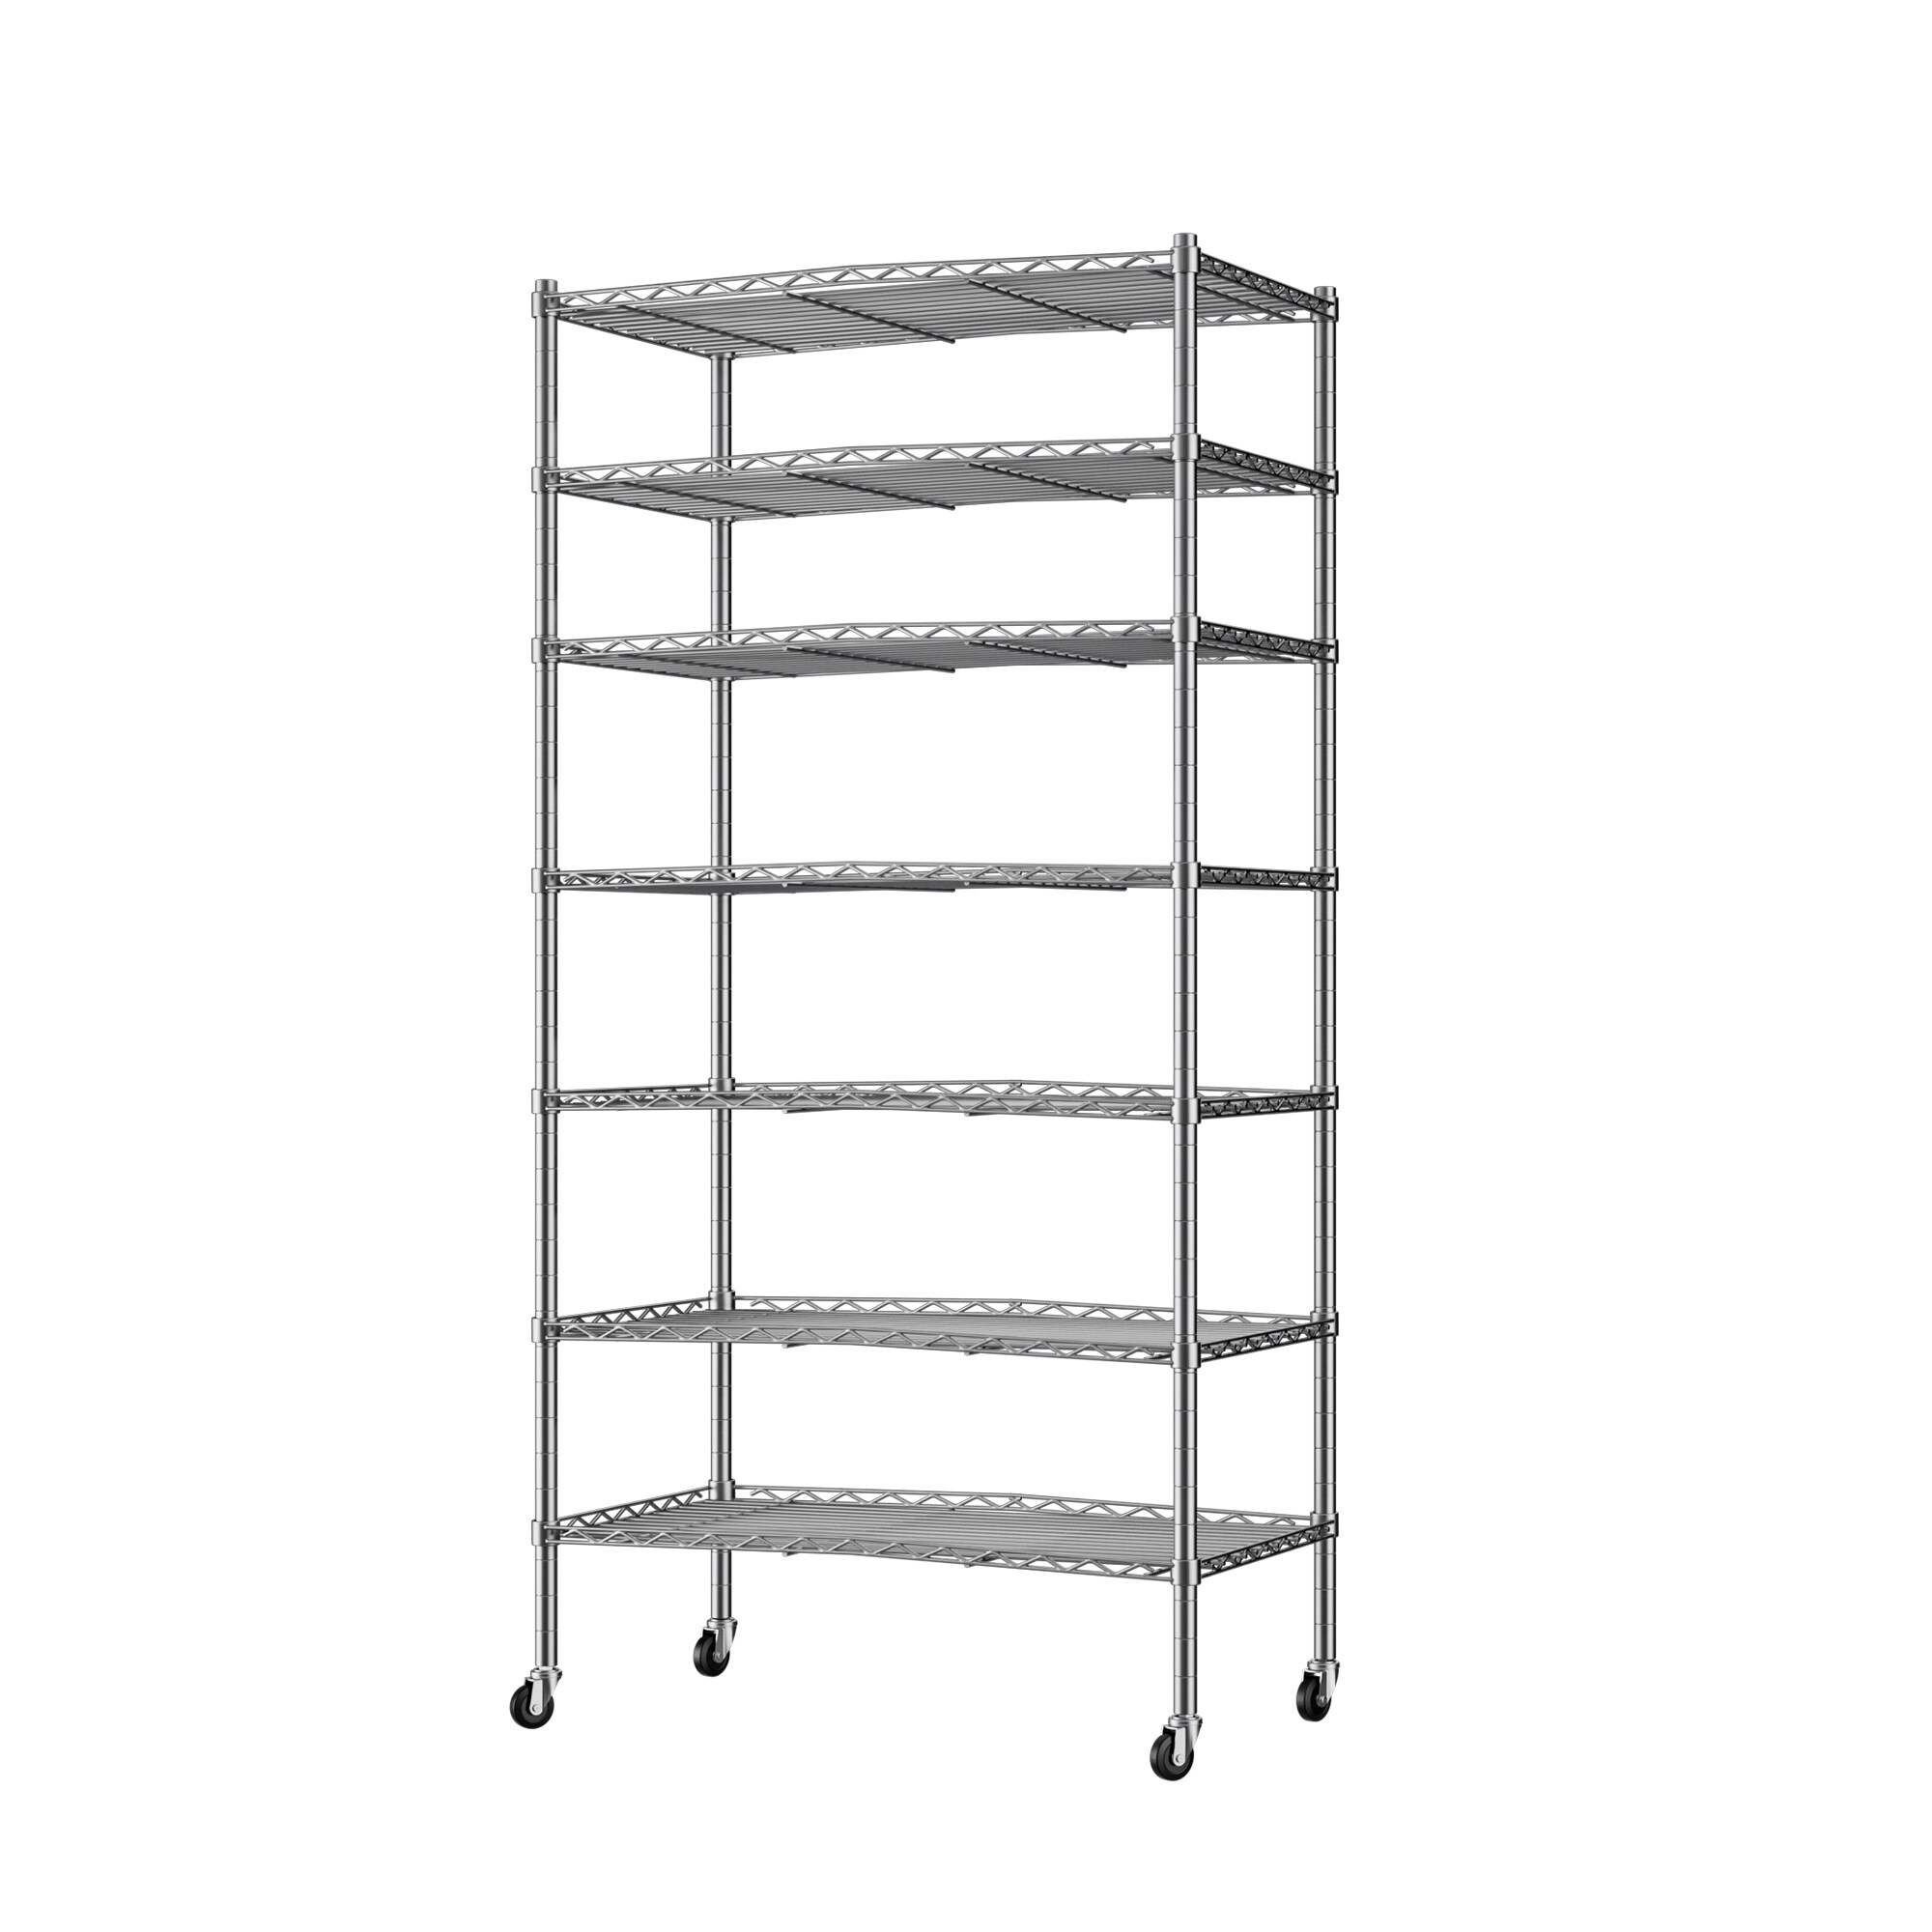 https://ak1.ostkcdn.com/images/products/is/images/direct/9c90d15a7ced79595f69152077412741a72ad5cc/7-Tier-Wire-Shelving-Unit-Adjustable-Metal-Garage-Storage-Shelves-with-Wheels.jpg